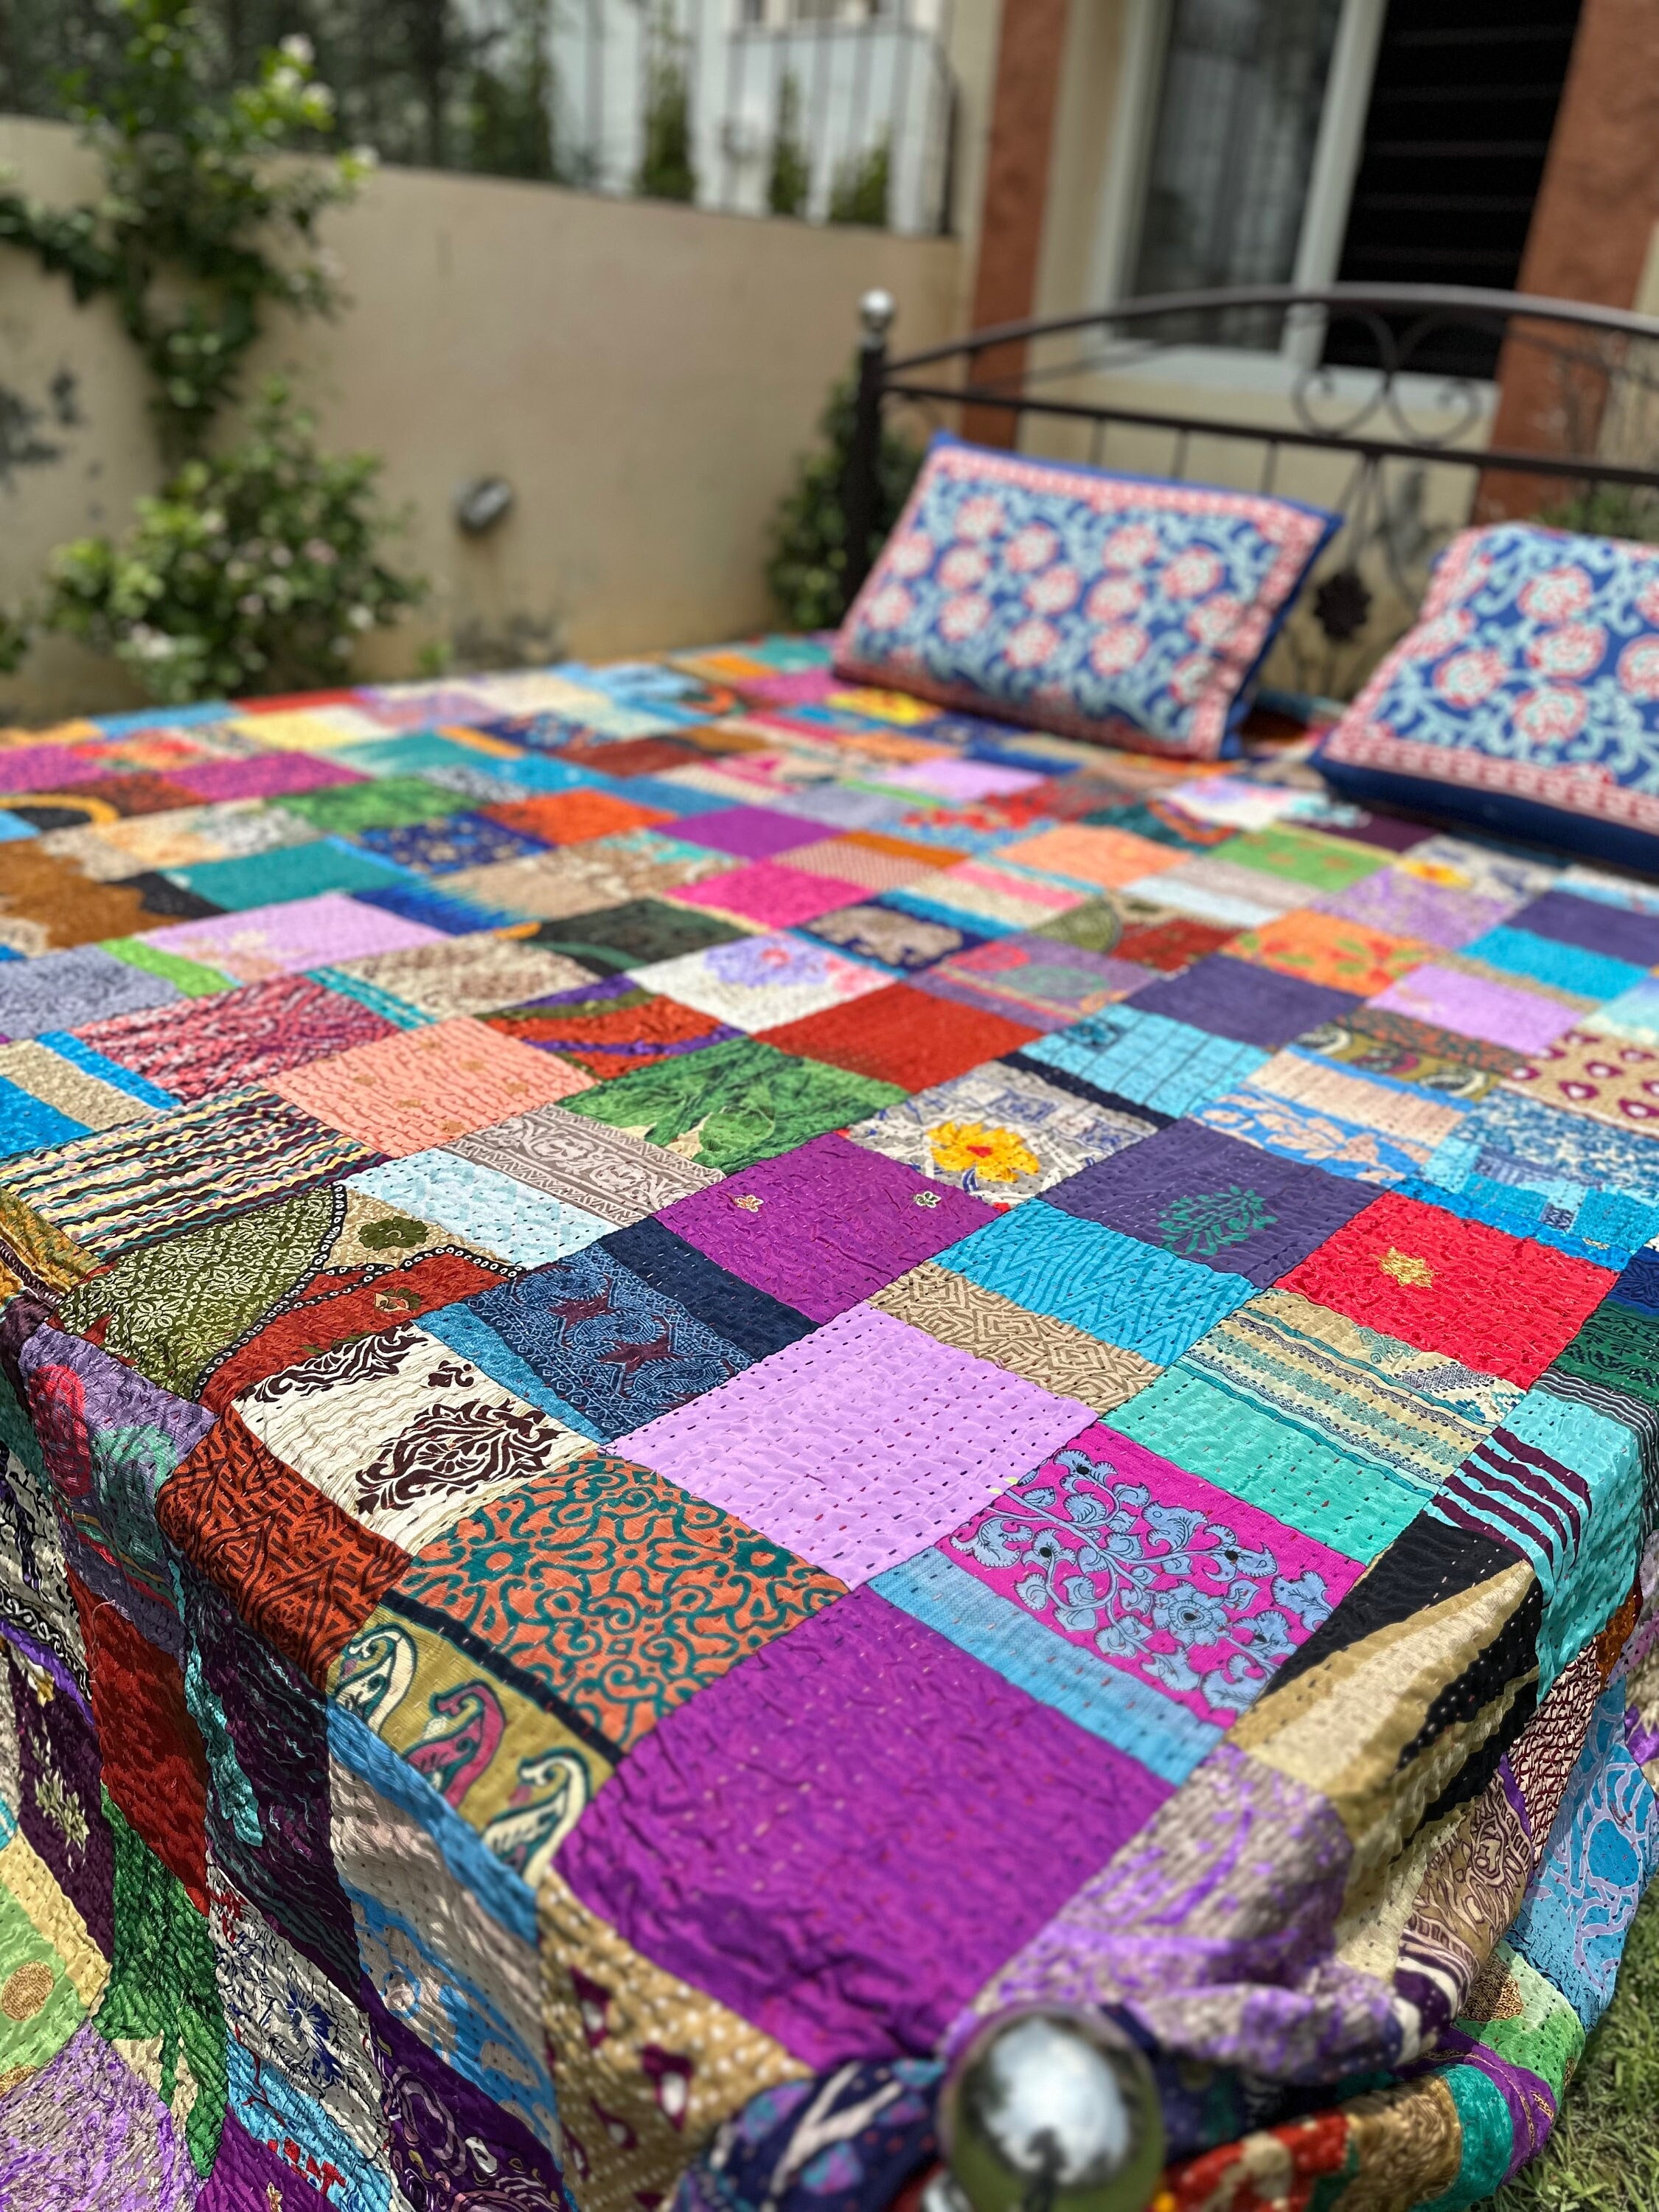 Quilts for Sale, Patchwork Quilt Handmade, Heirloom Quilt, Quilting Gifts,  Patch Work, Bedding Quilt, Handmade Cover, Blanket, Wall Hanging, 